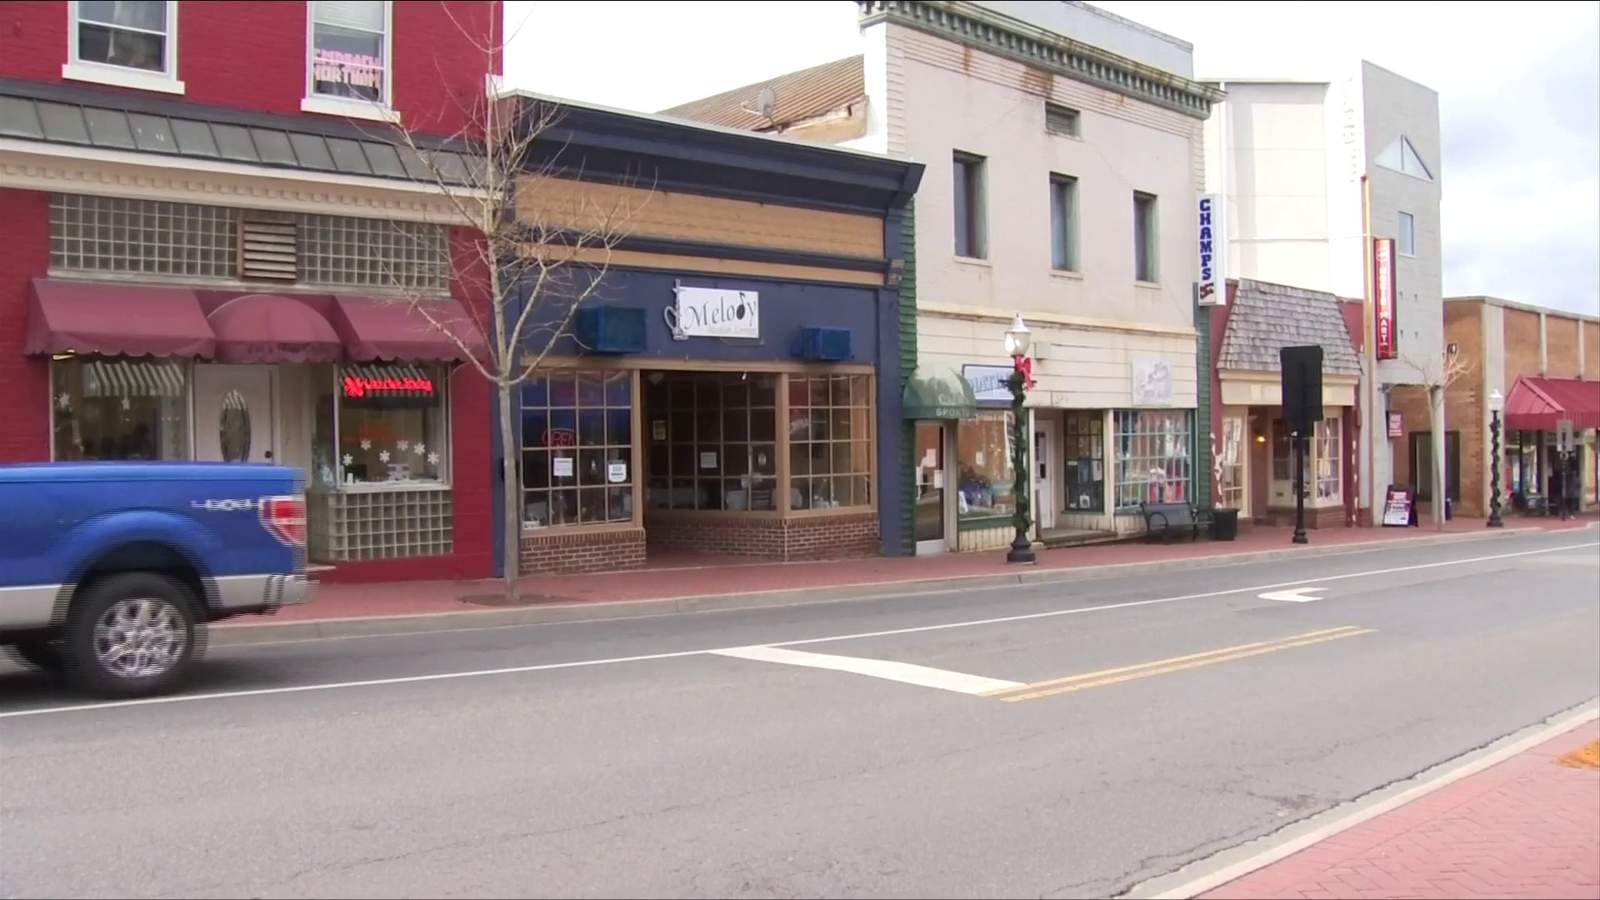 Loan extension offers hope to local businesses